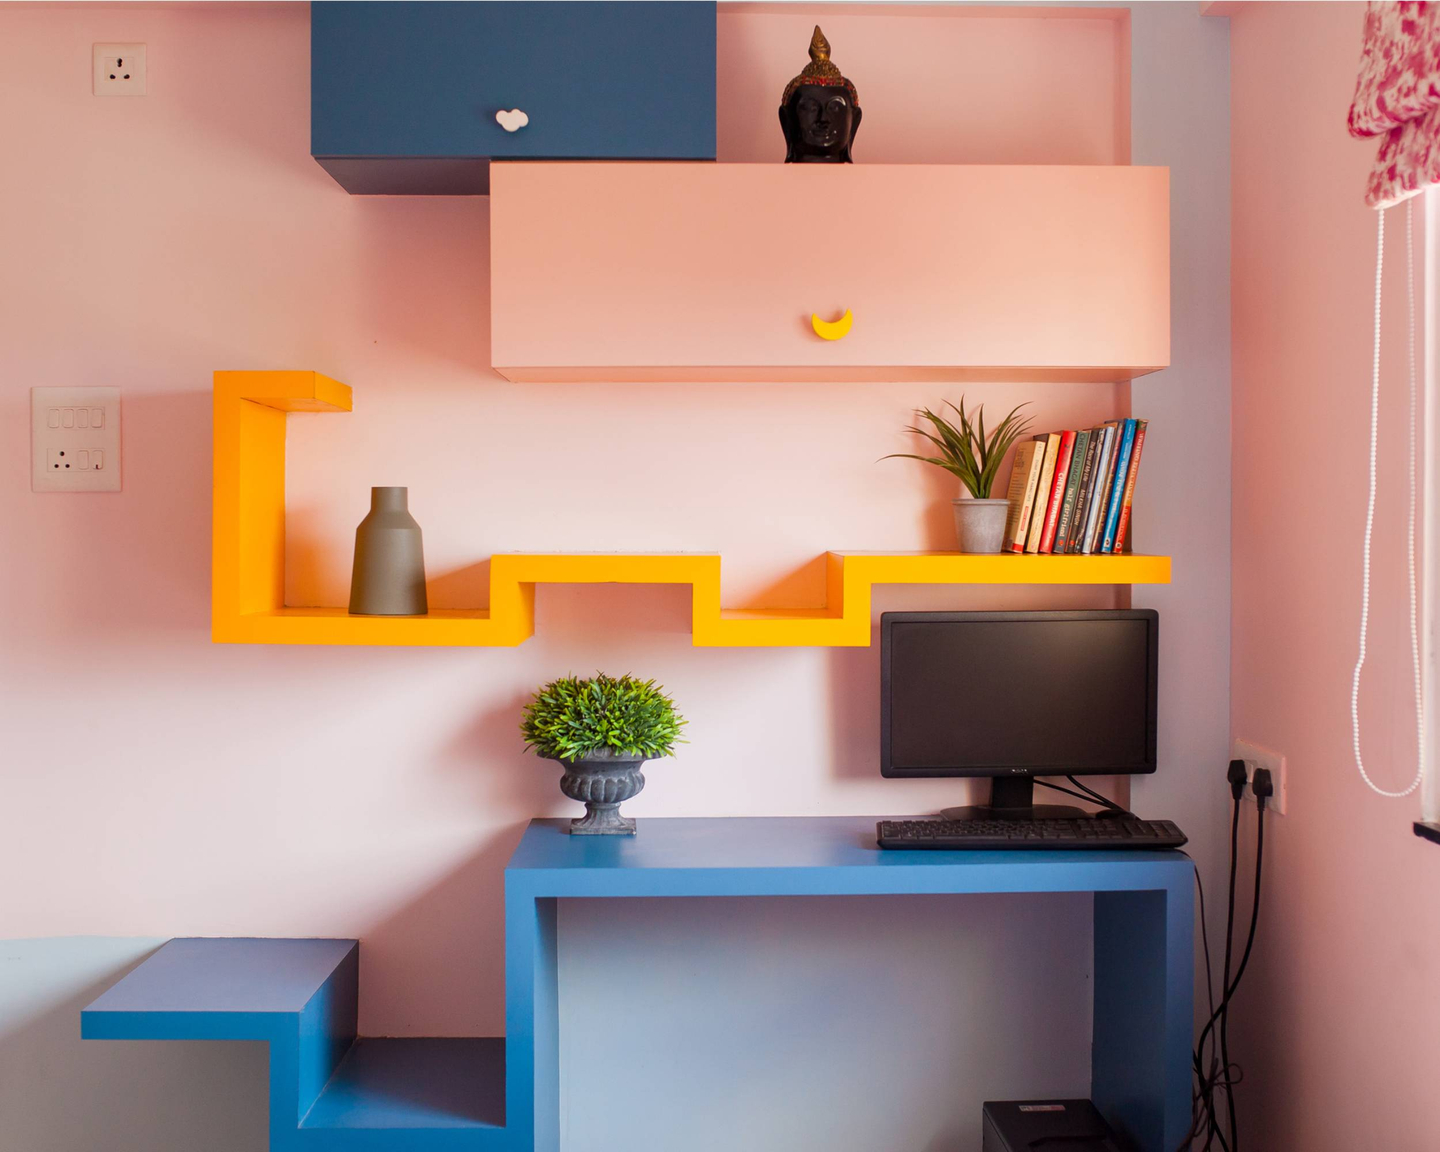 Home Office Design With Colourful Table And Wall Storage - Livspace